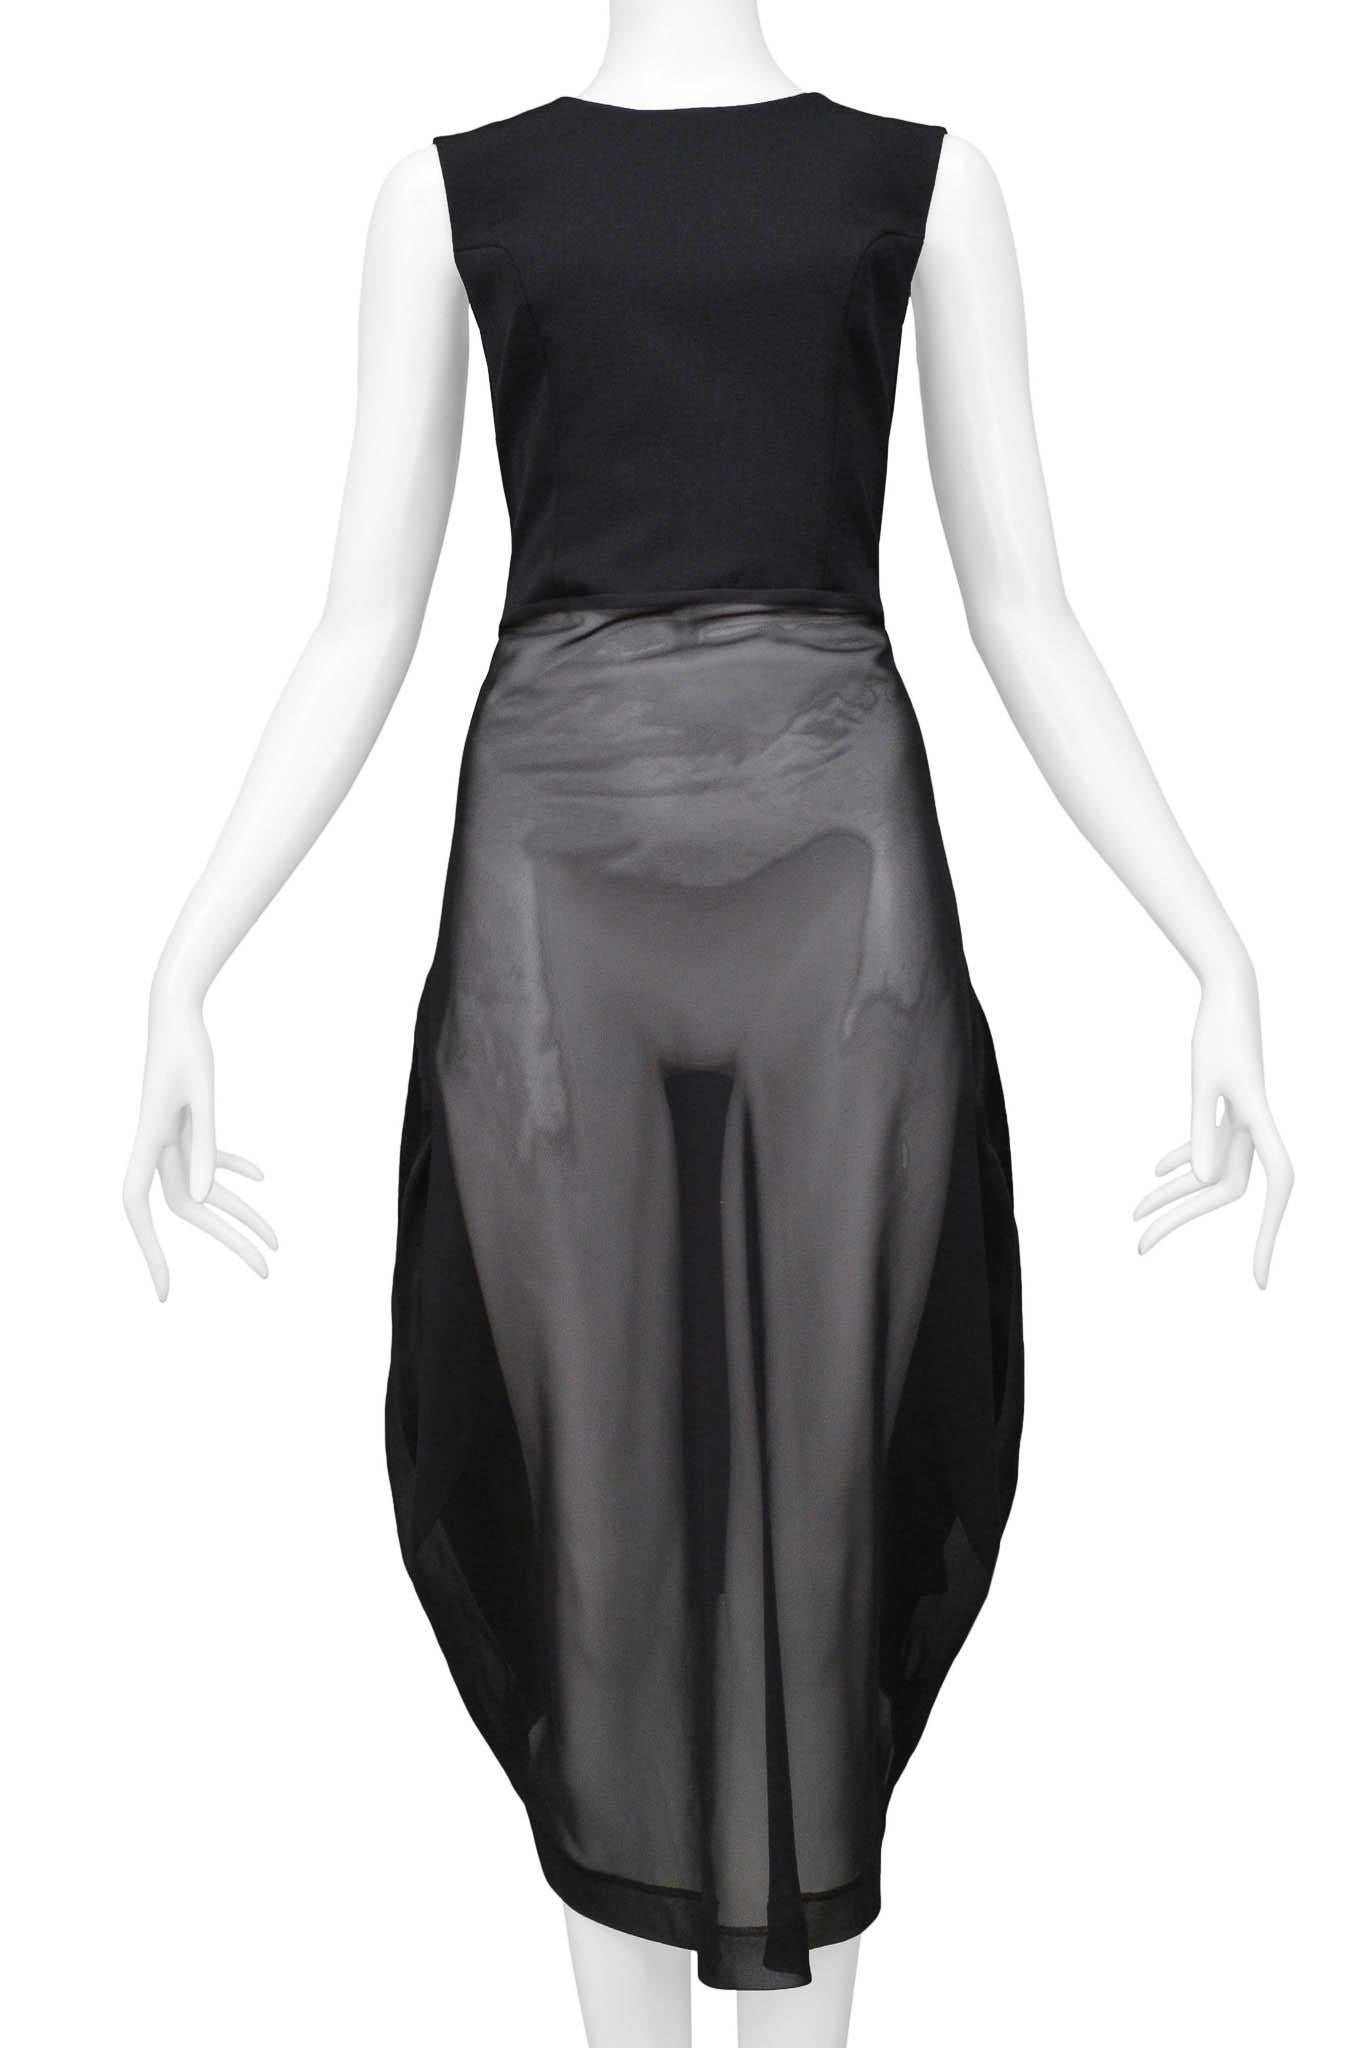 Comme Des Garcons Black Sheer Front Concept Dress 1997 In Excellent Condition For Sale In Los Angeles, CA